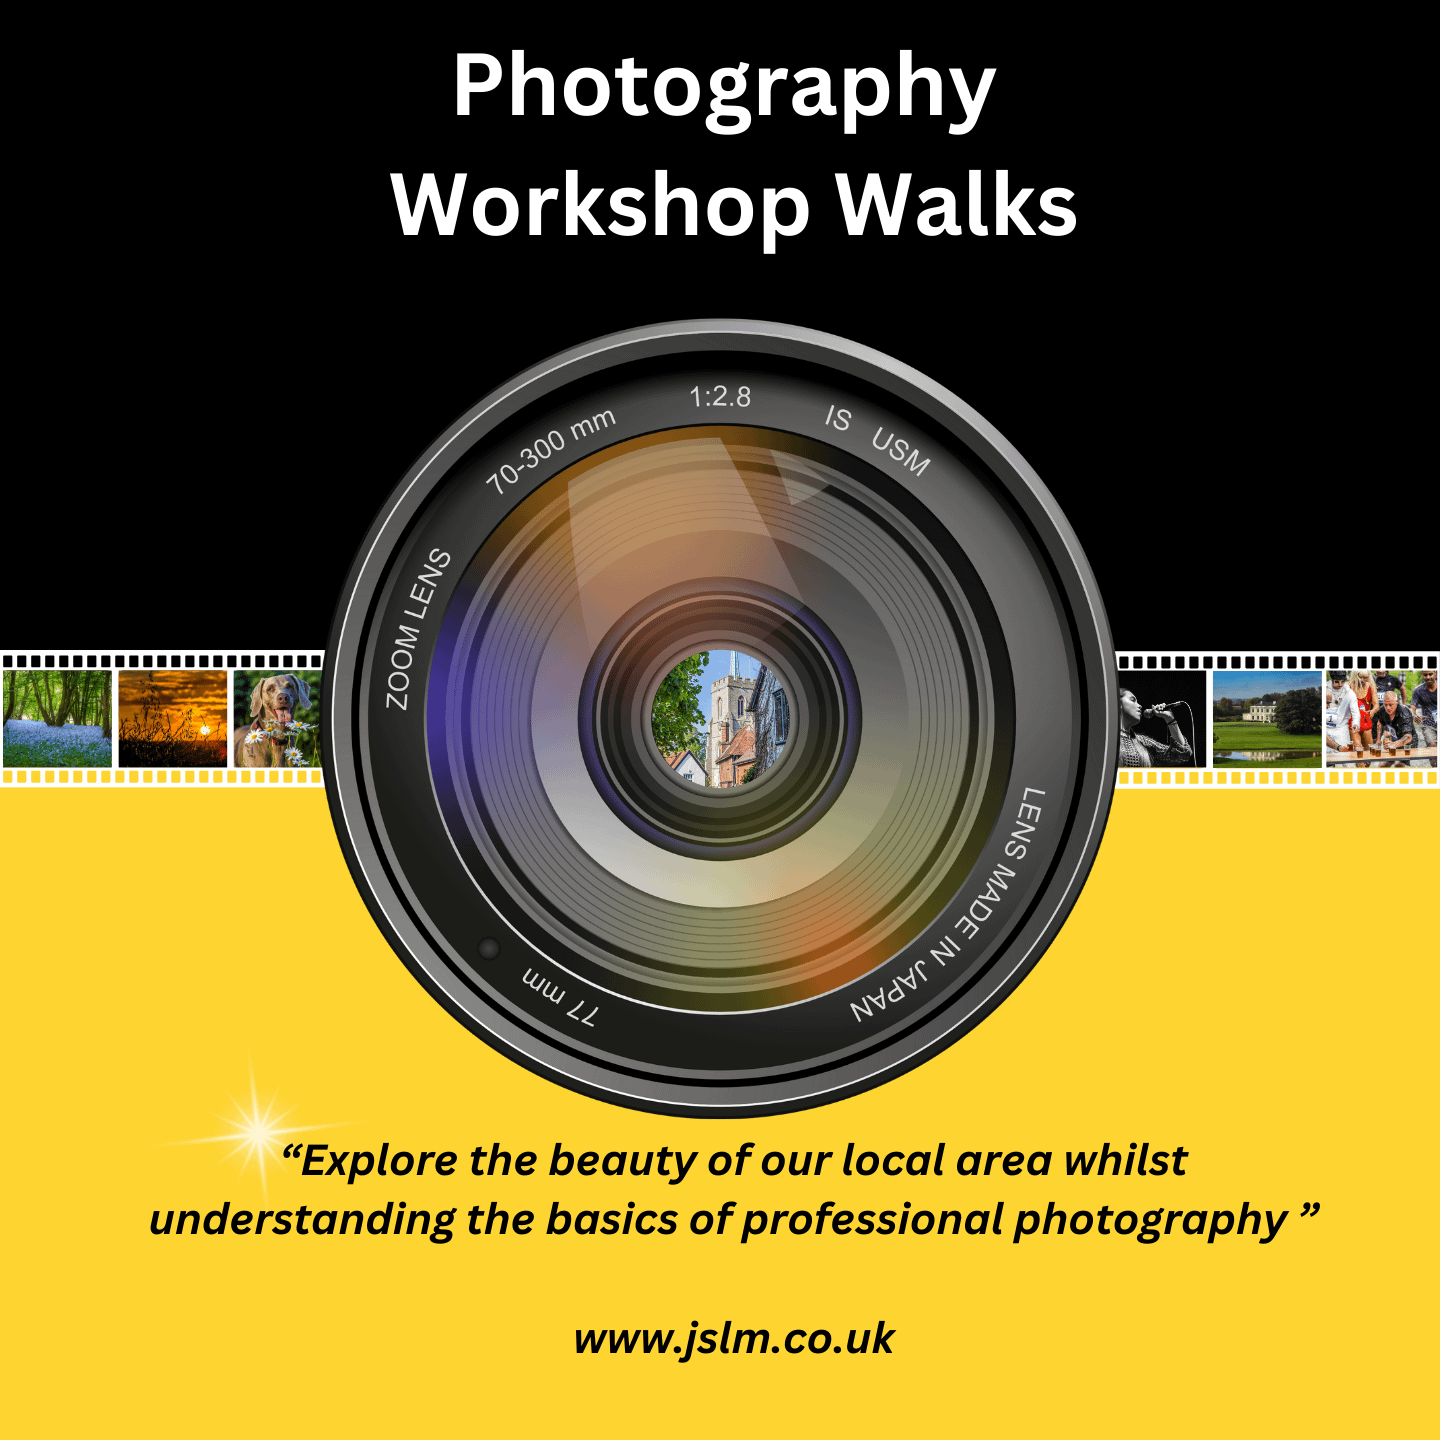 Poster with a cameral lens and writing promoting our workshop walks